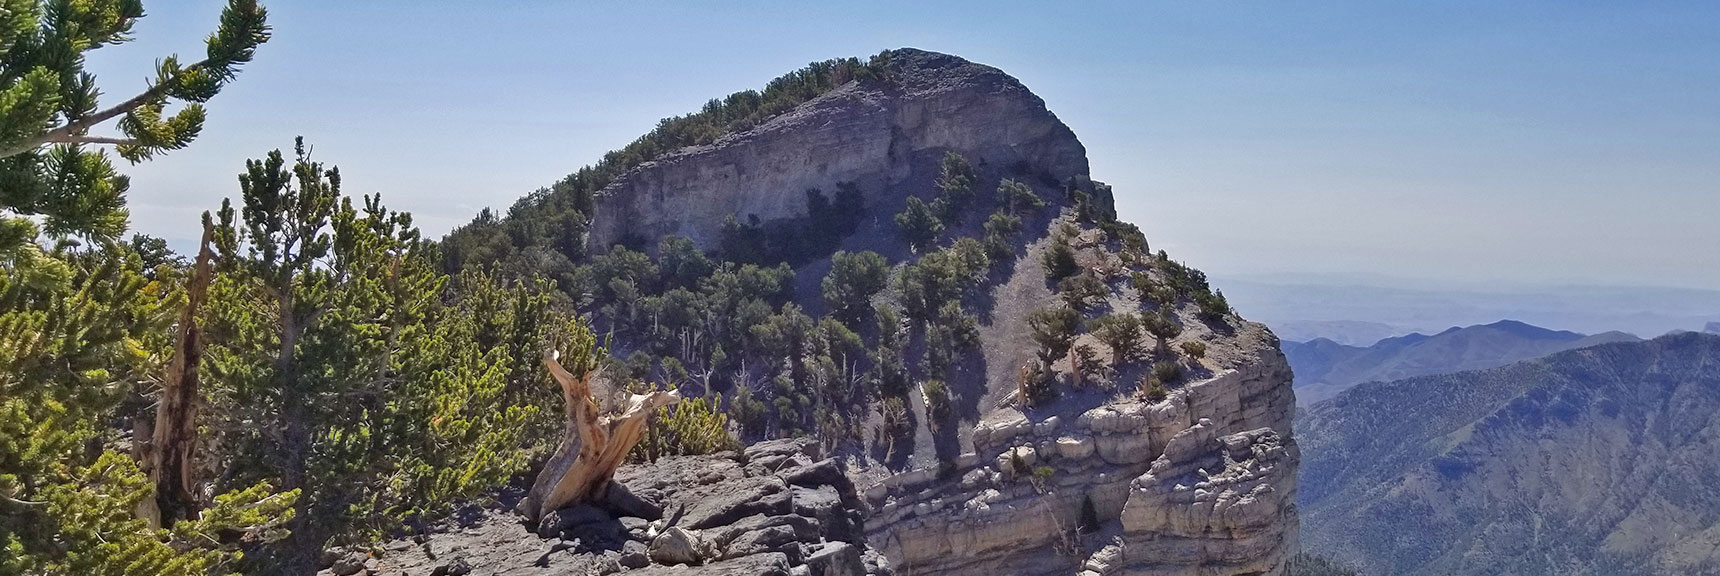 First View of Mummy's Toe from the Western Cliffs | Mummy Mountain's Toe, Mt. Charleston Wilderness, Nevada